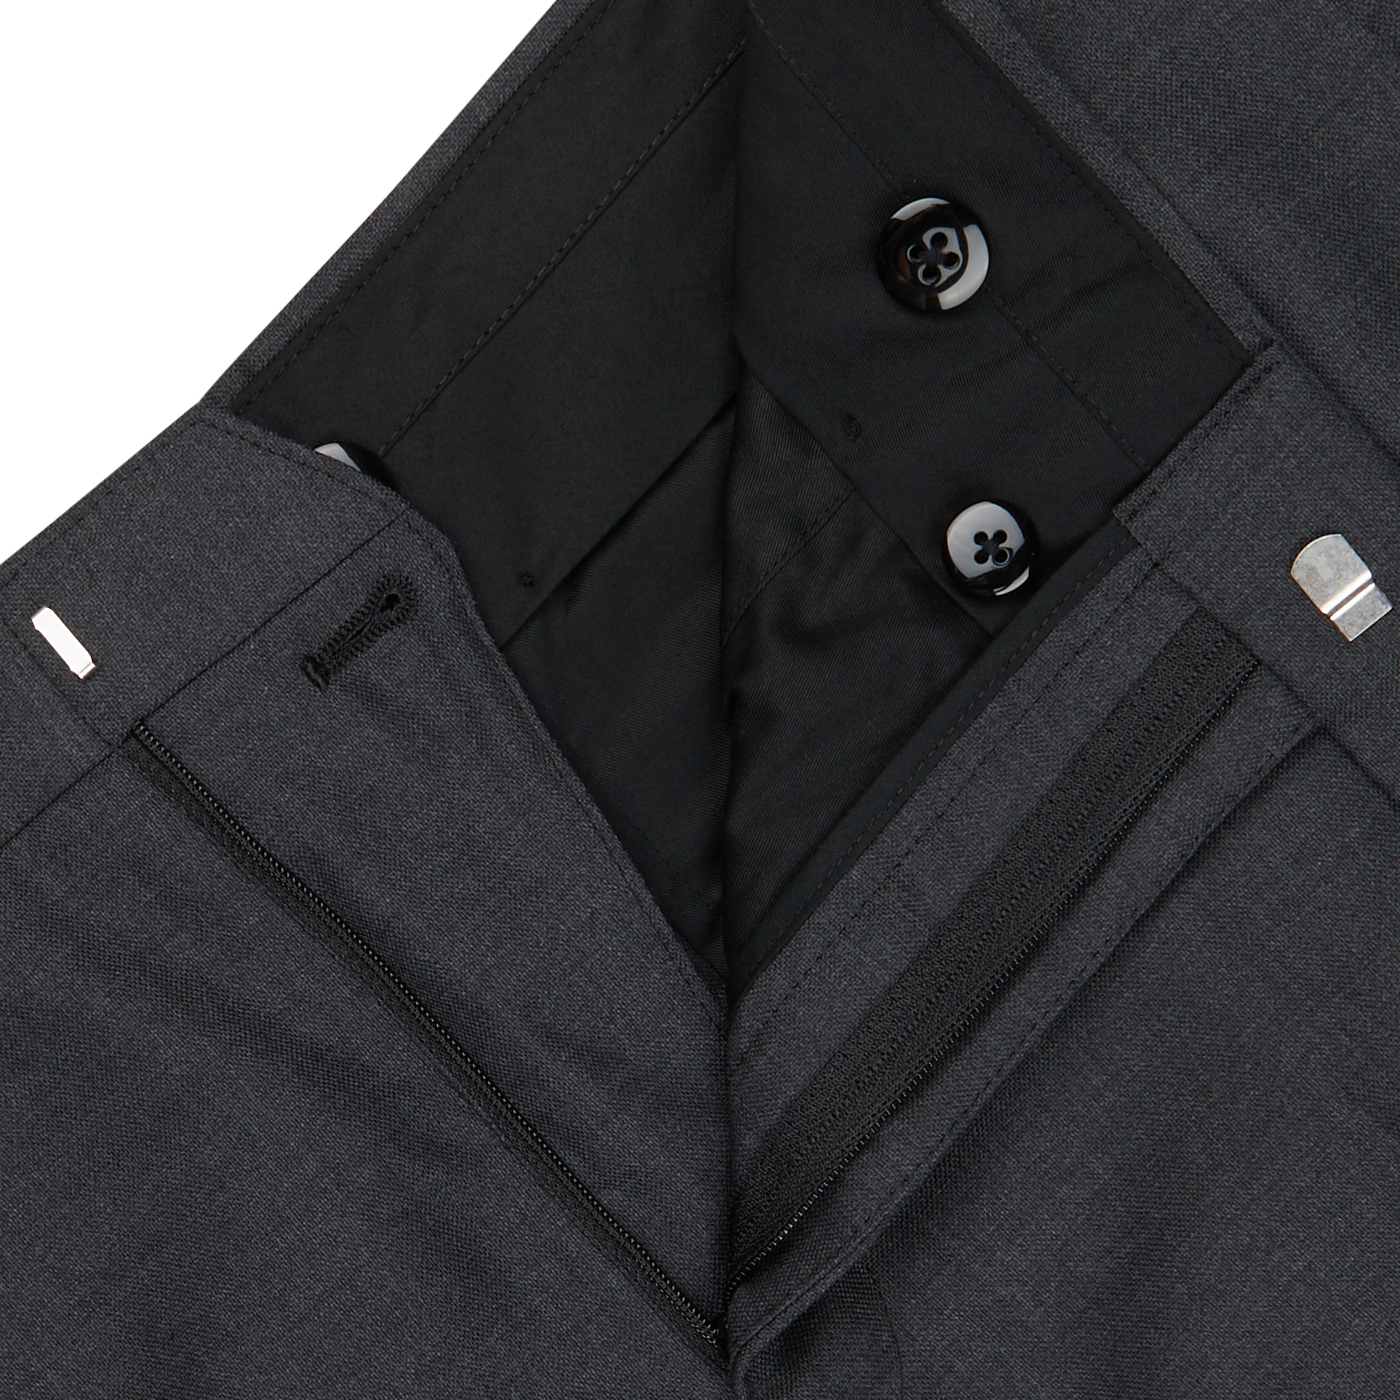 Close-up of a Baltzar Sartorial grey Super 100's Wool Flat Front Suit Trousers with visible button, zipped pocket, and classic tailored fit inner lining details.